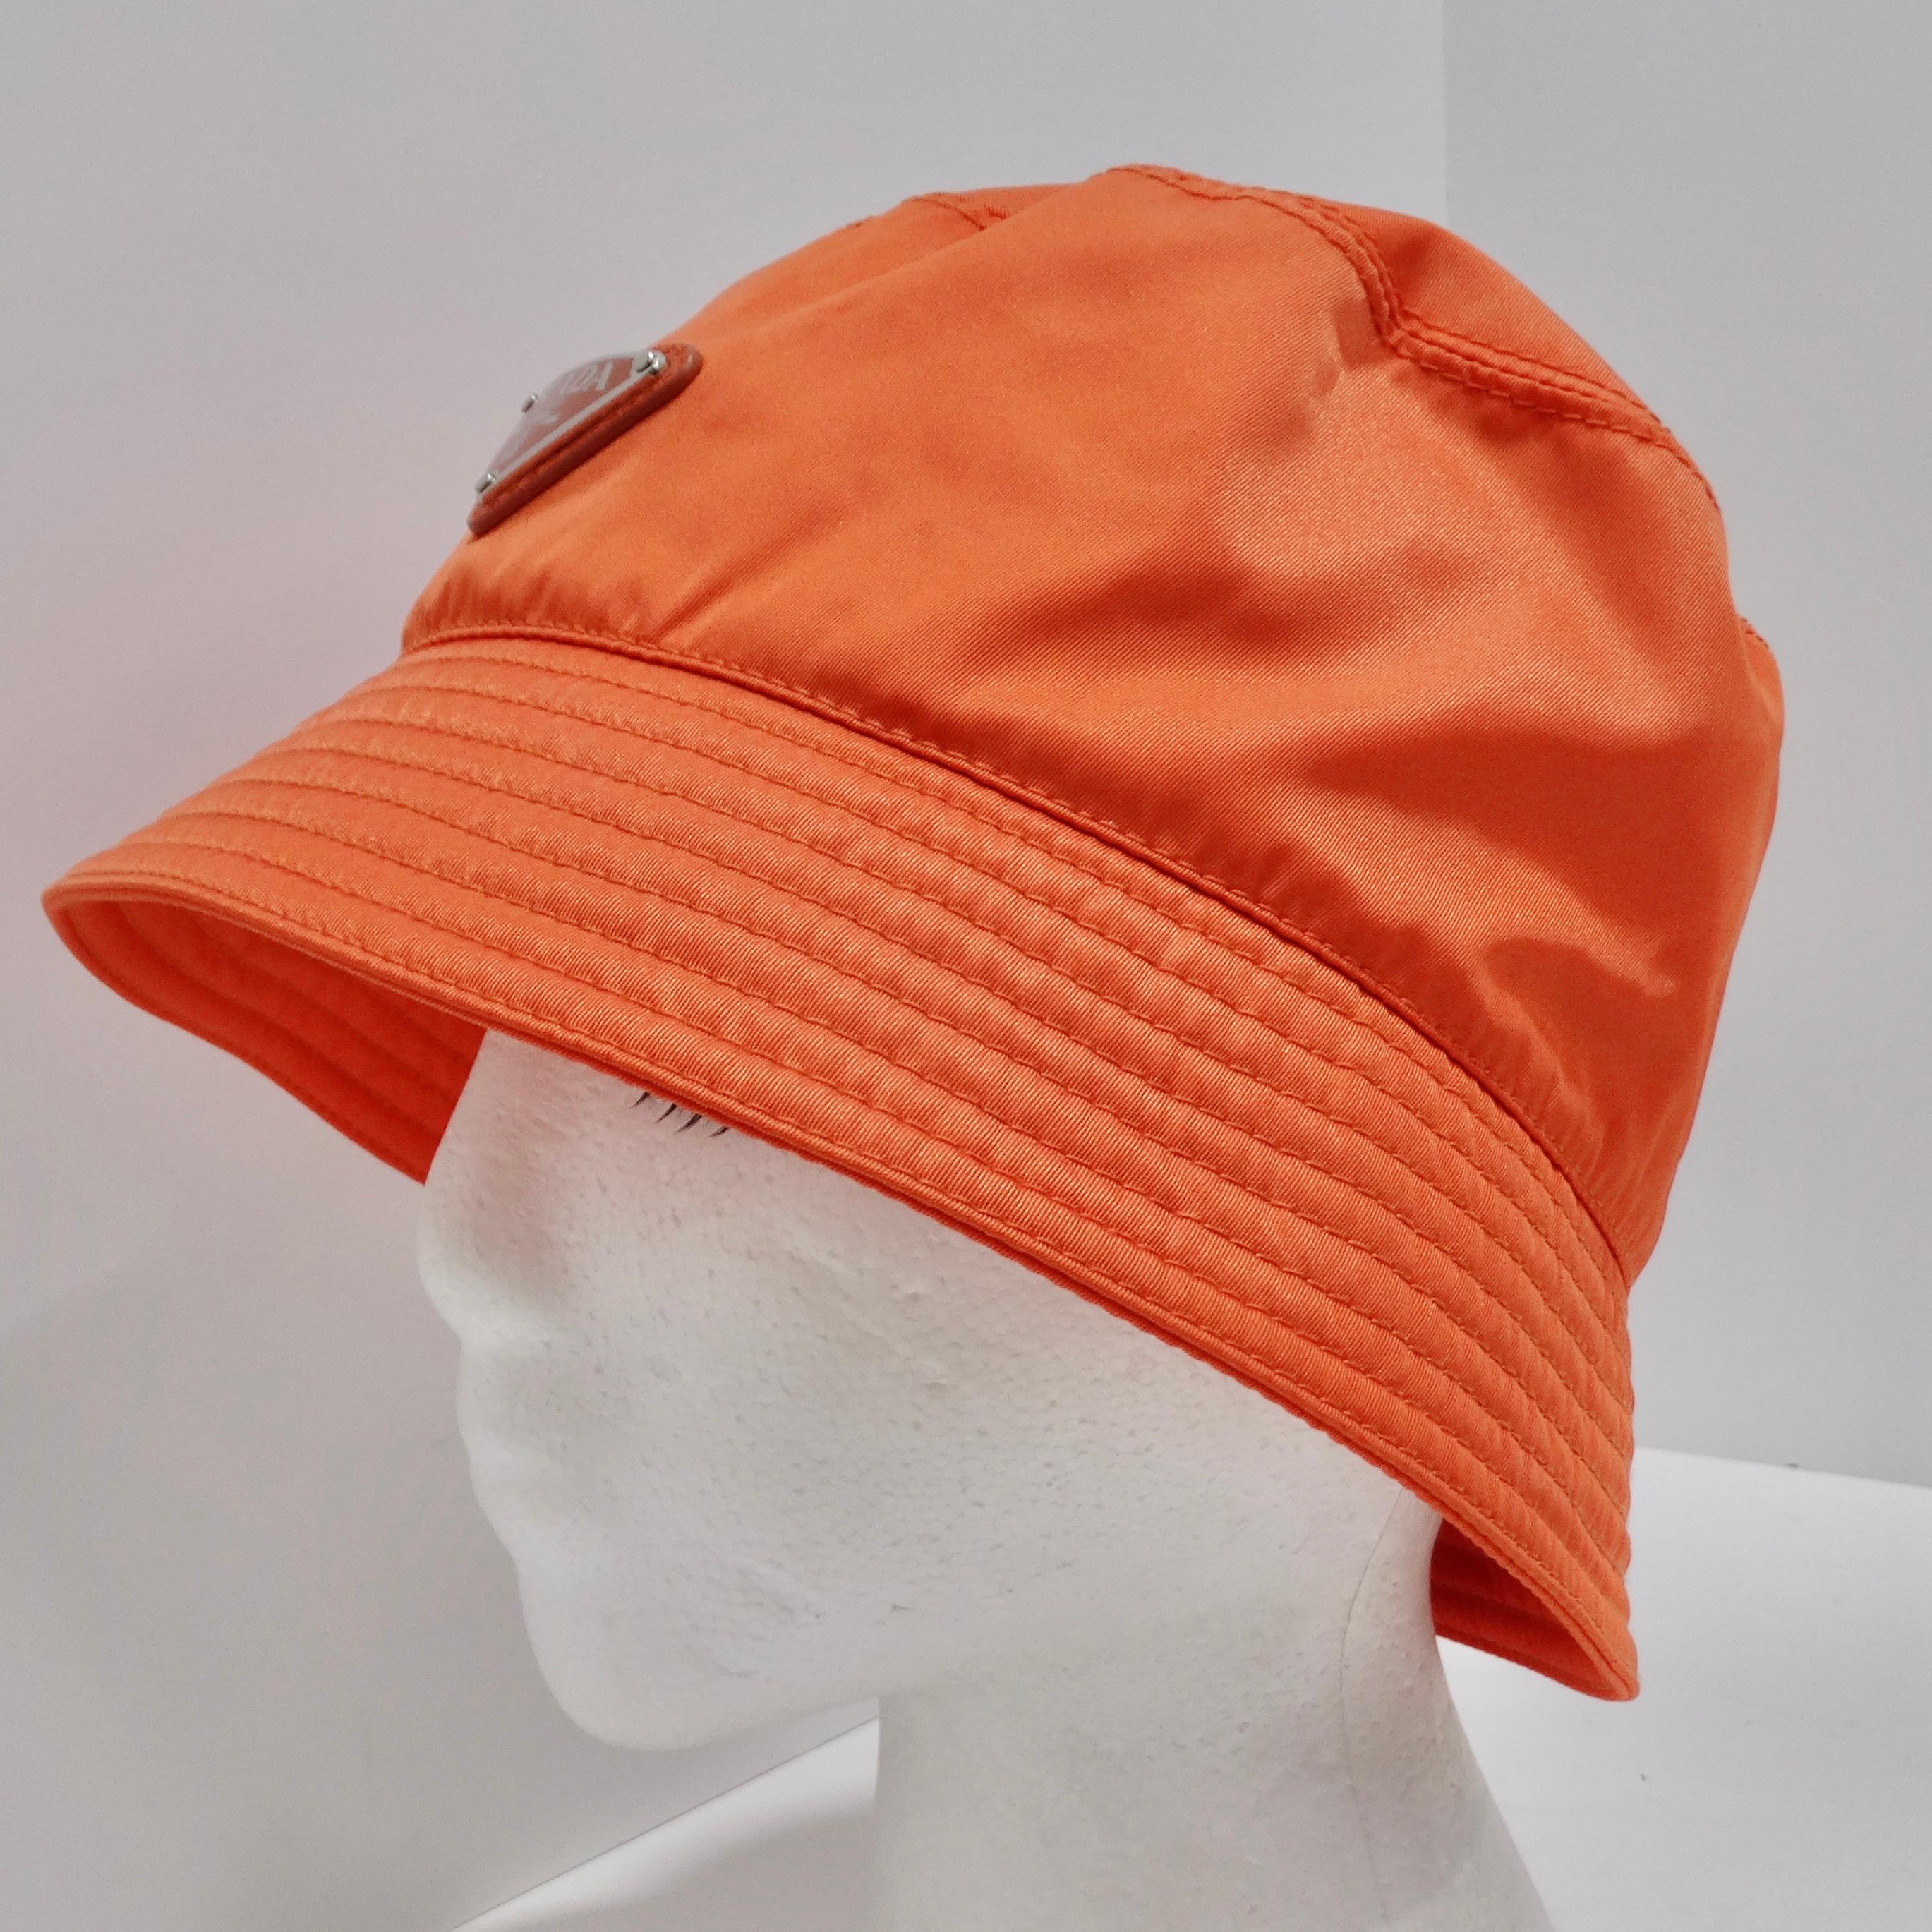 
Elevate your style and make an eco-conscious statement with the Prada Re-Nylon Bucket Hat in vibrant orange. This classic bucket hat showcases the perfect fusion of fashion and sustainability, making it an iconic accessory for any wardrobe. The